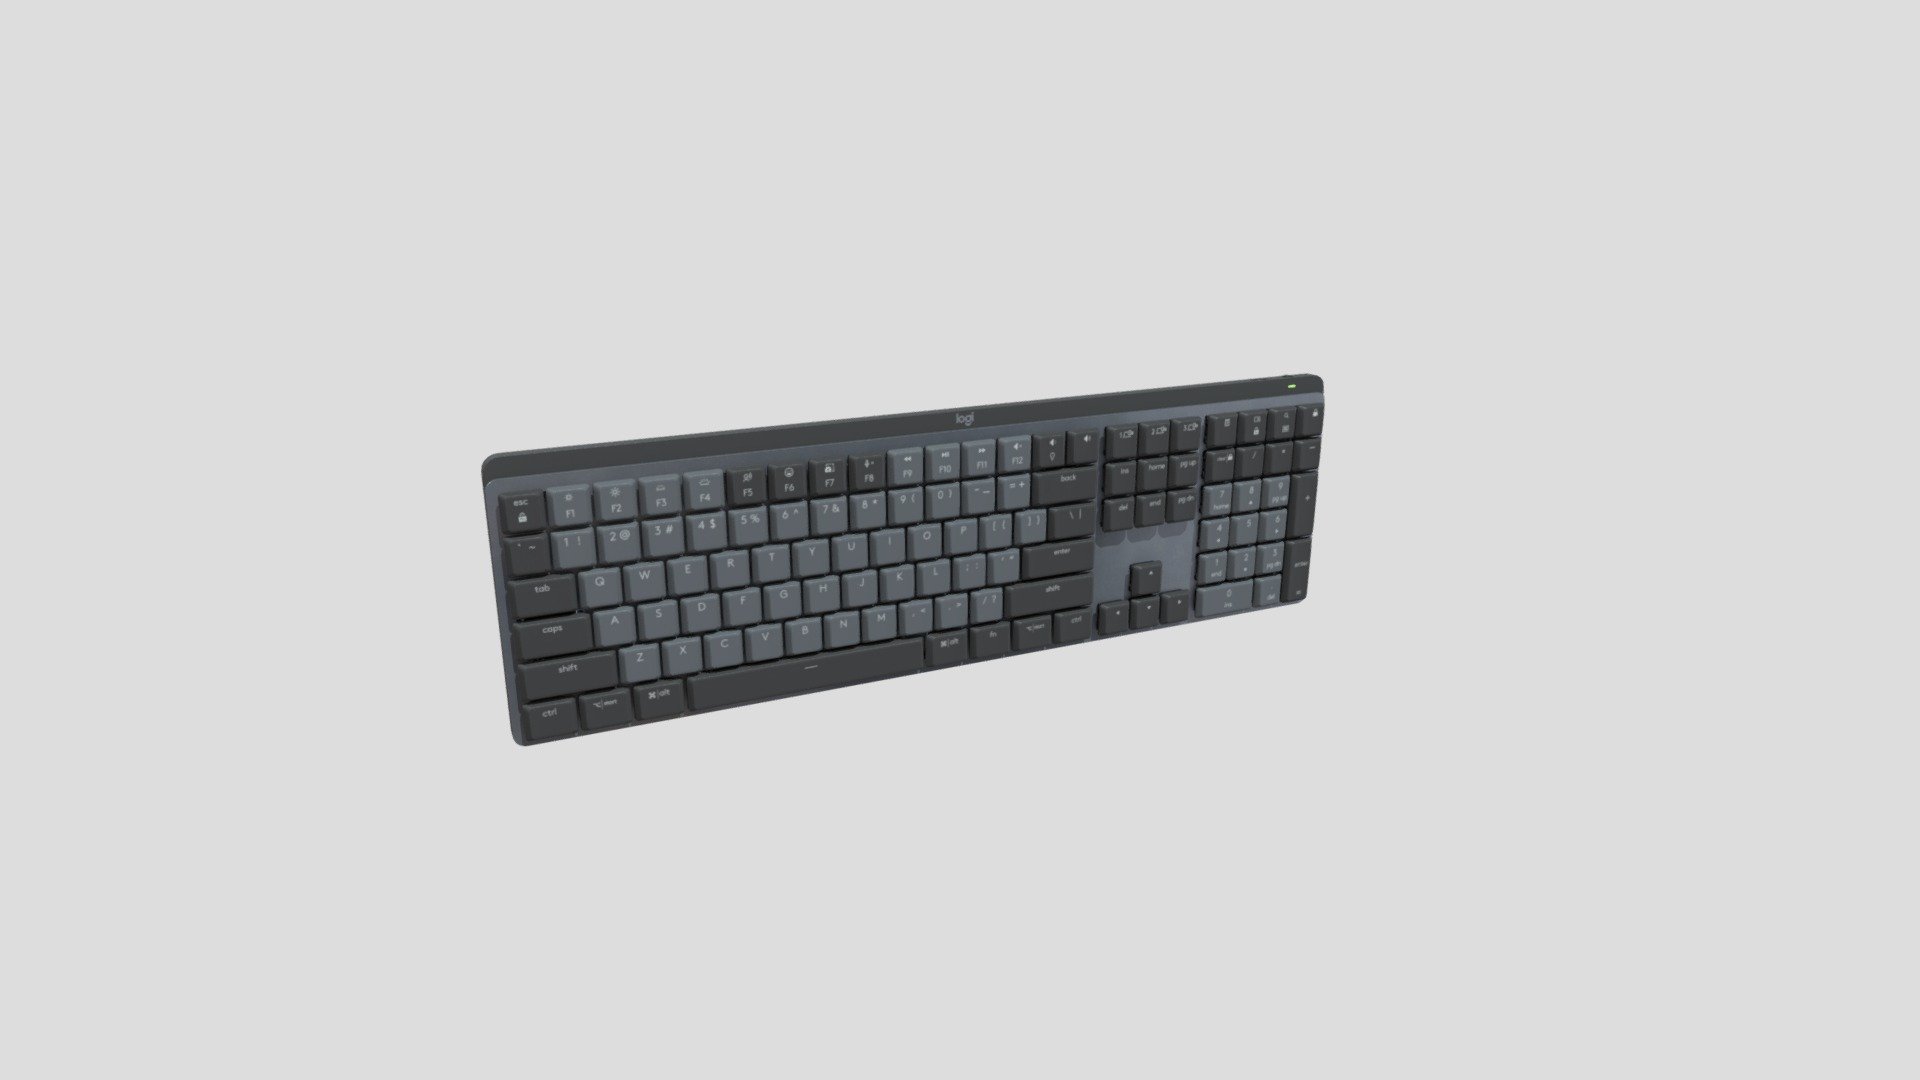 Discover this and many other exclusive models from Logitech and other brands only through https://www.headsketch.xyz - Logitech Mx mechanical - 3D model by Headsketch.xyz (@headsketch) 3d model